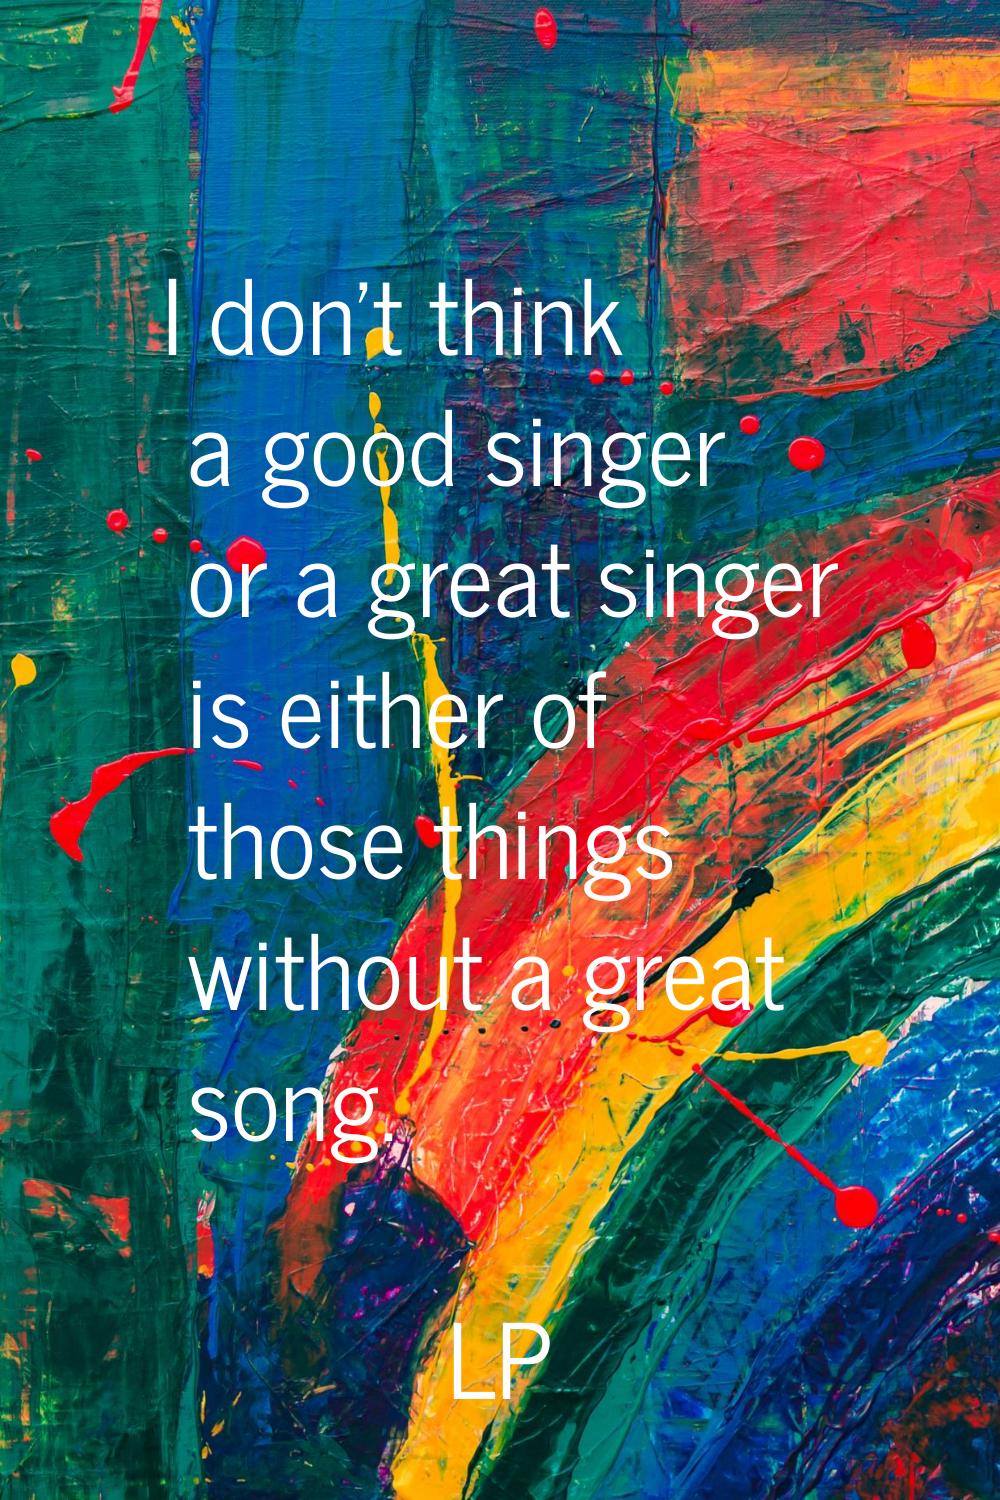 I don't think a good singer or a great singer is either of those things without a great song.